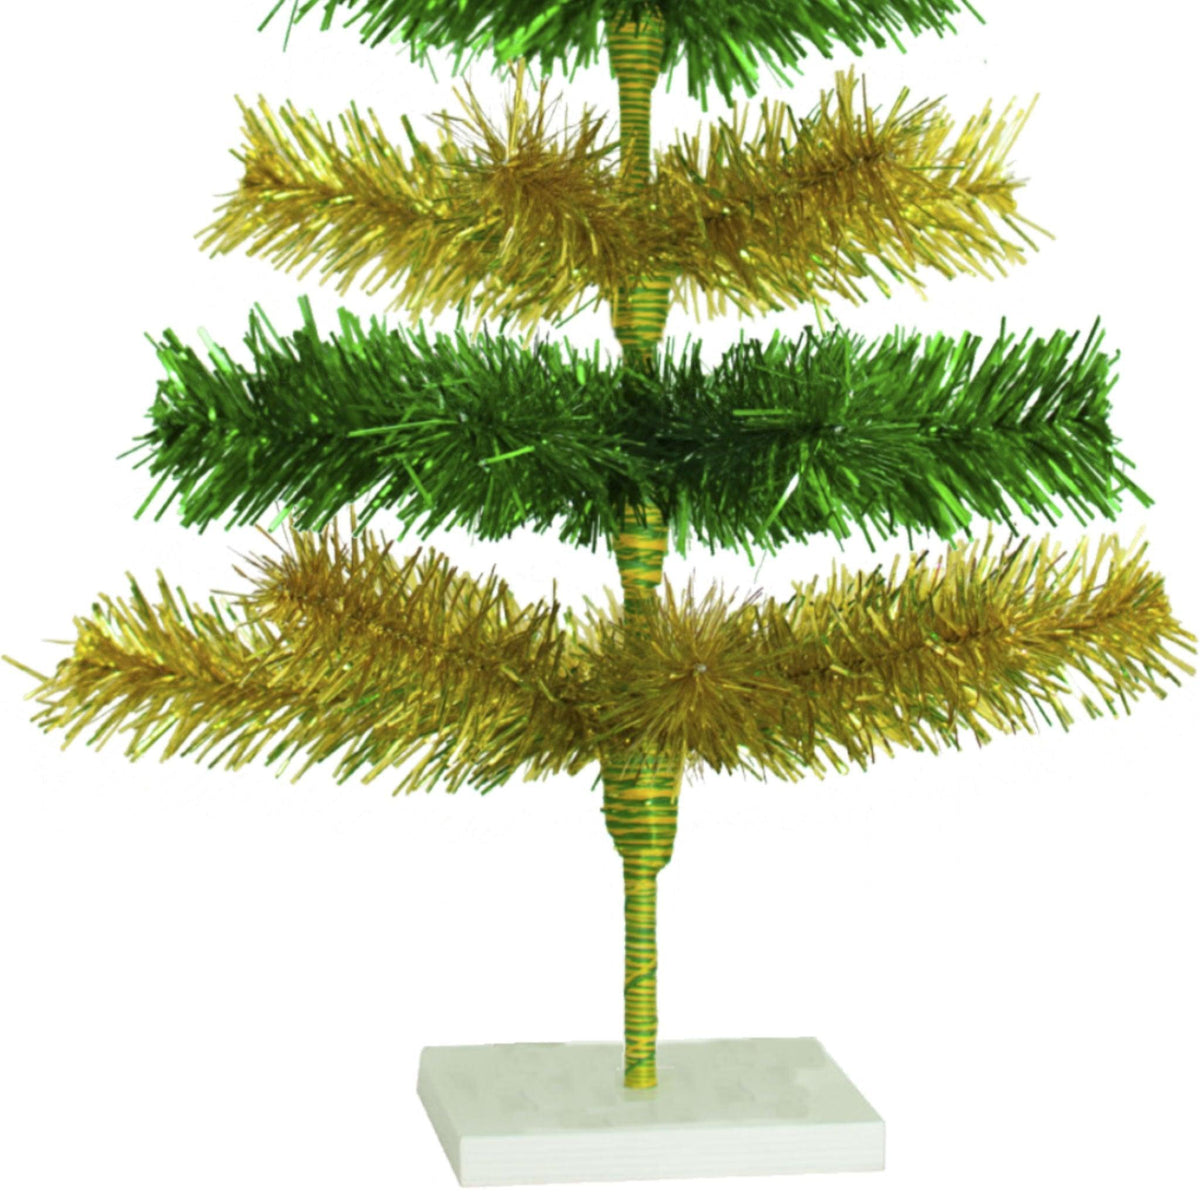 Introducing Lee Display's brand new St. Patrick's Day Themed Christmas Trees made by hand in the USA on sale at leedisplay.com